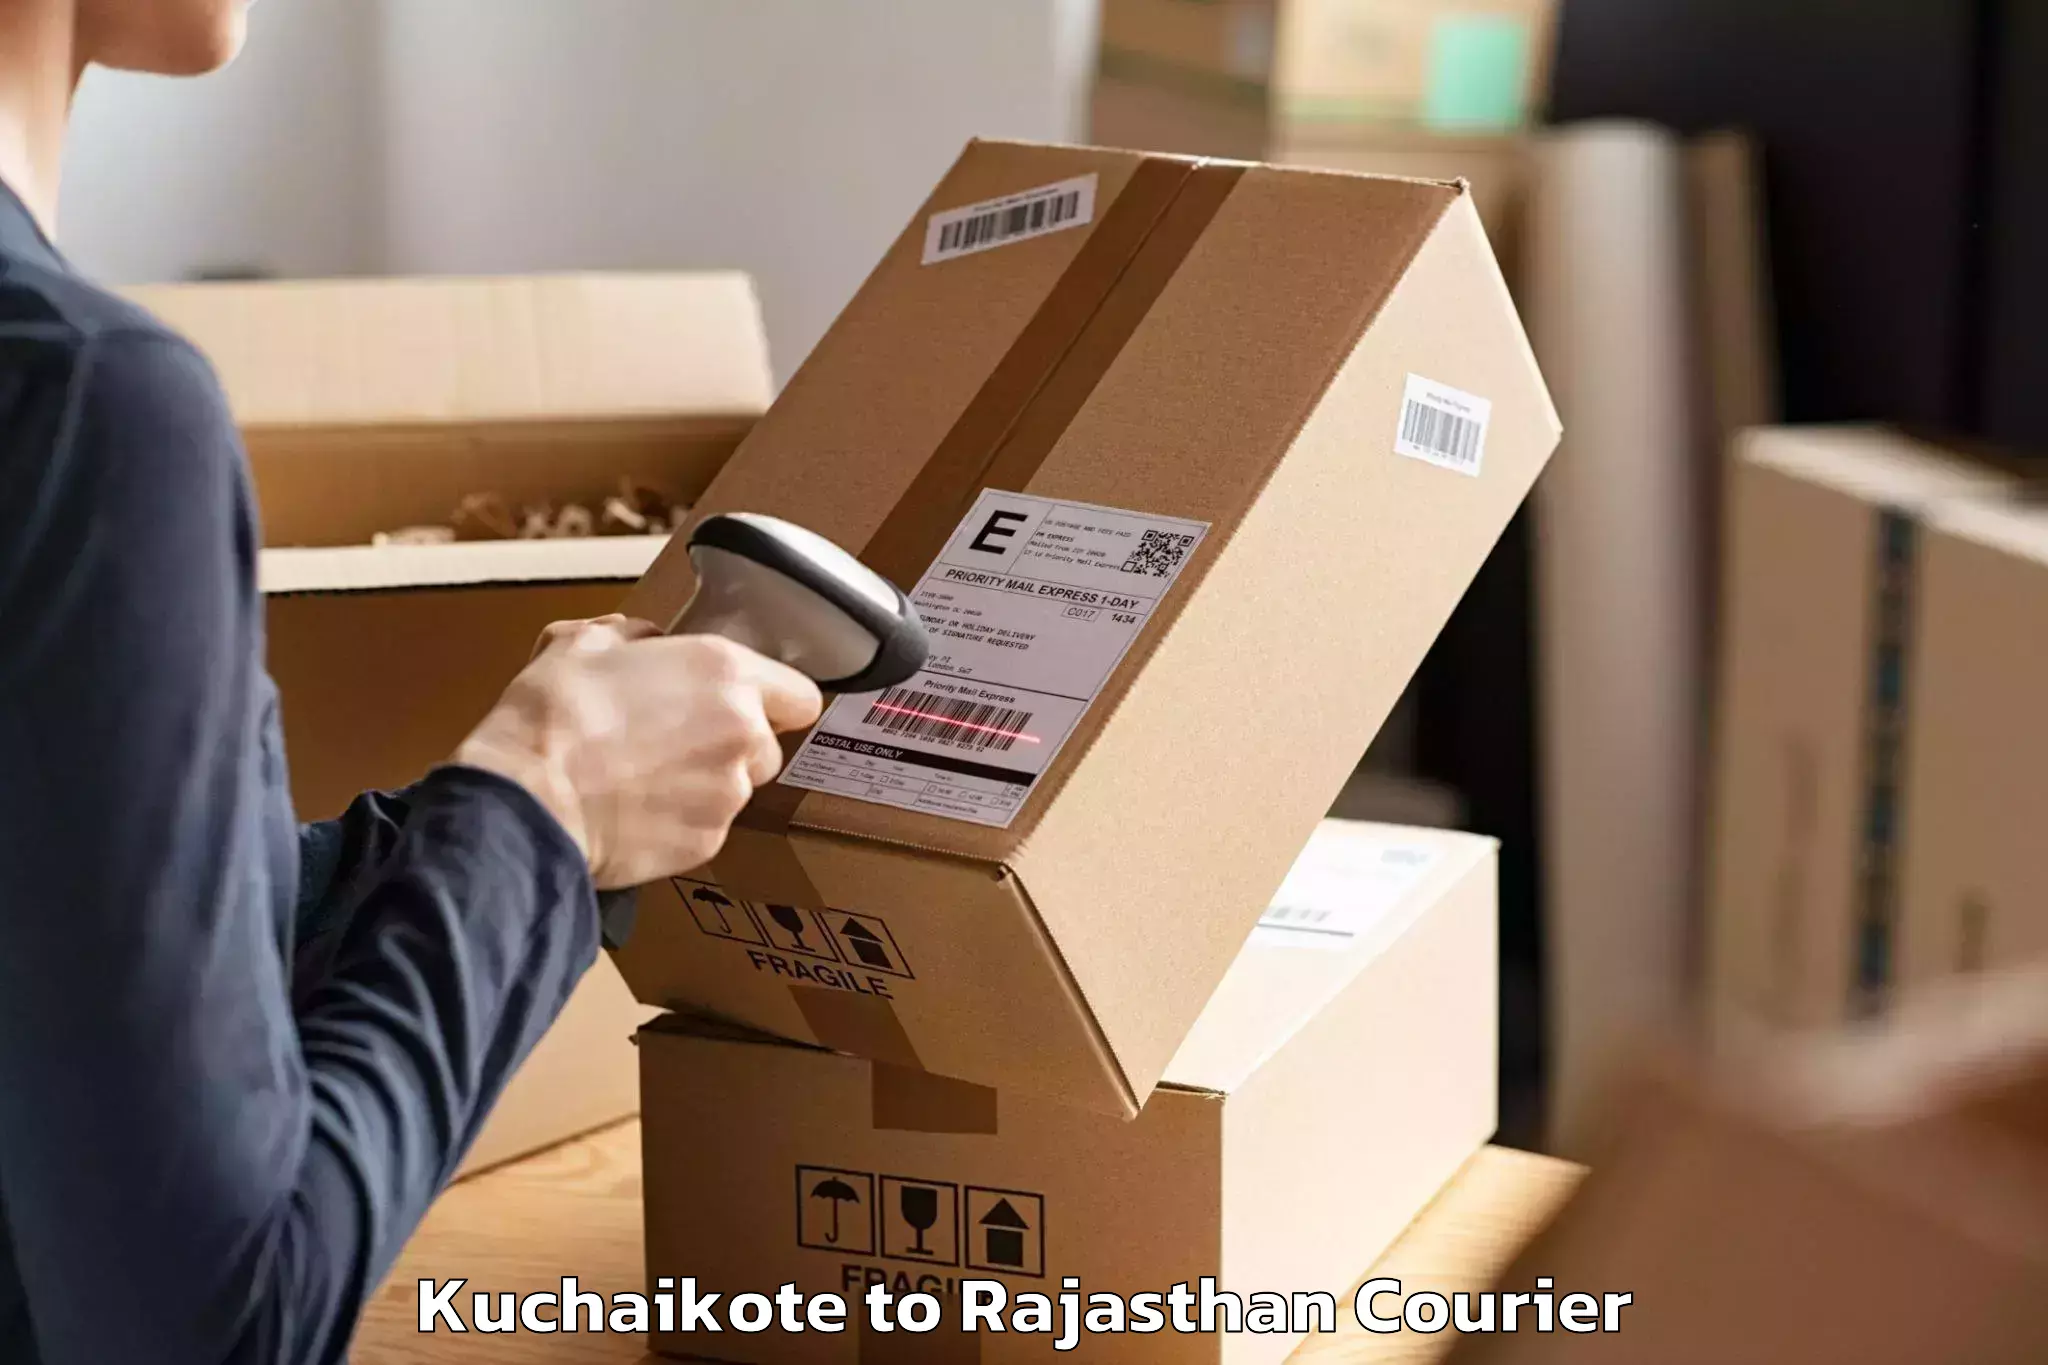 Moving and storage services Kuchaikote to Jaipur